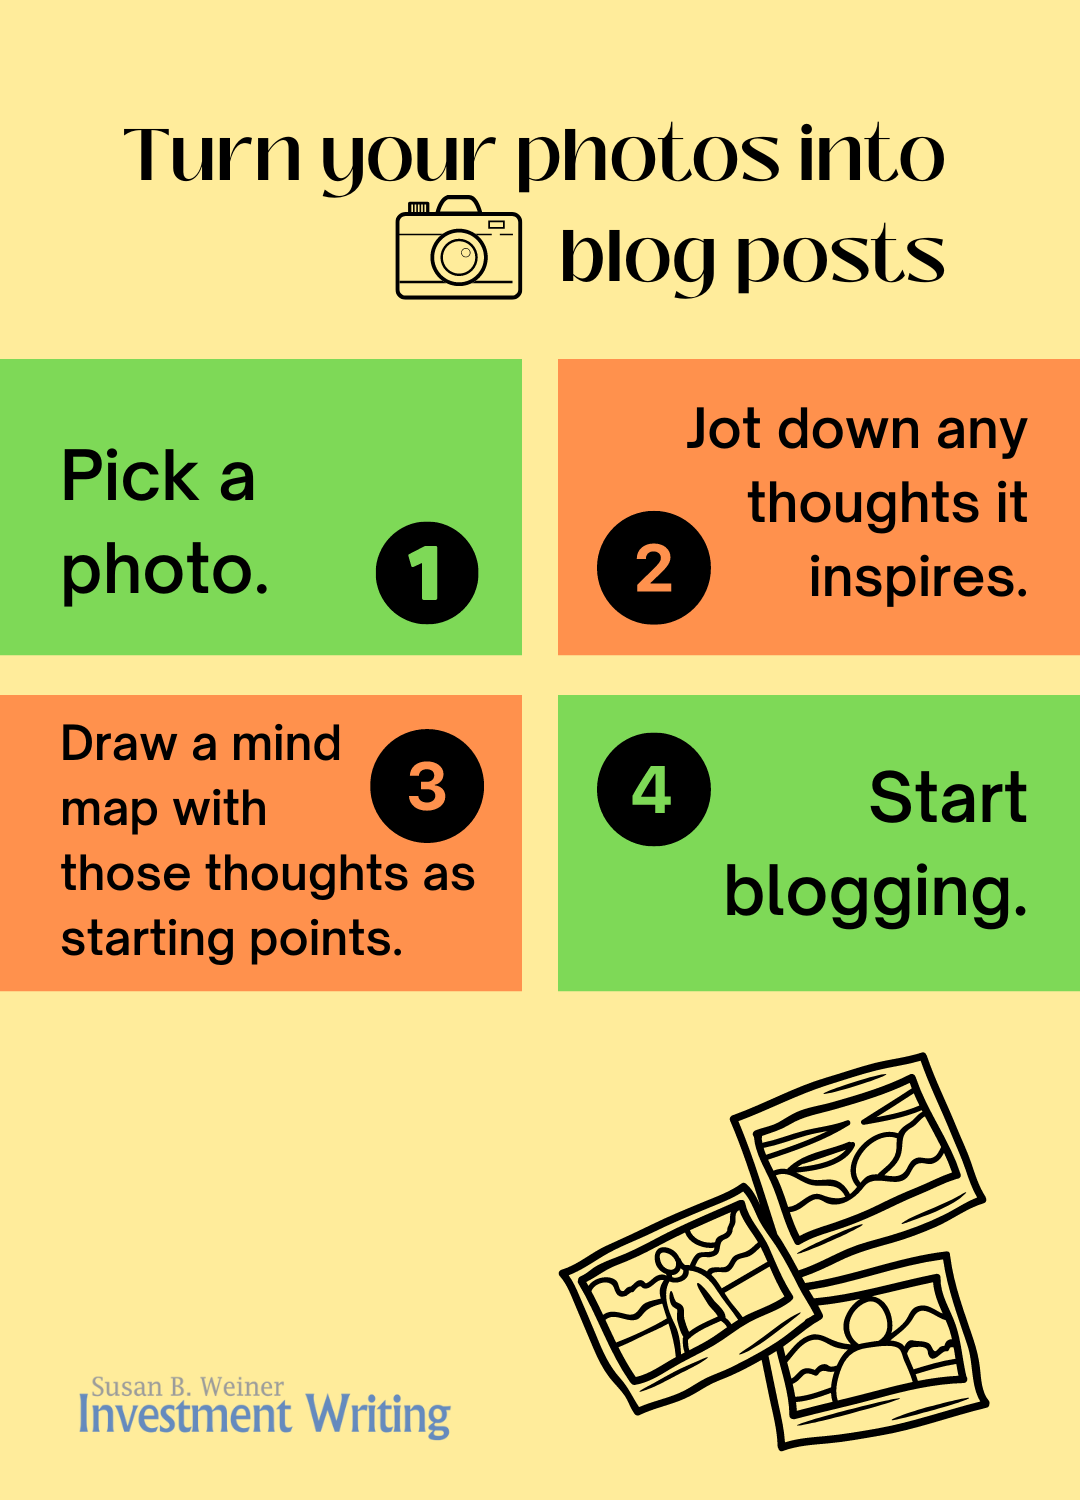 Turn your photos into blog posts infographic